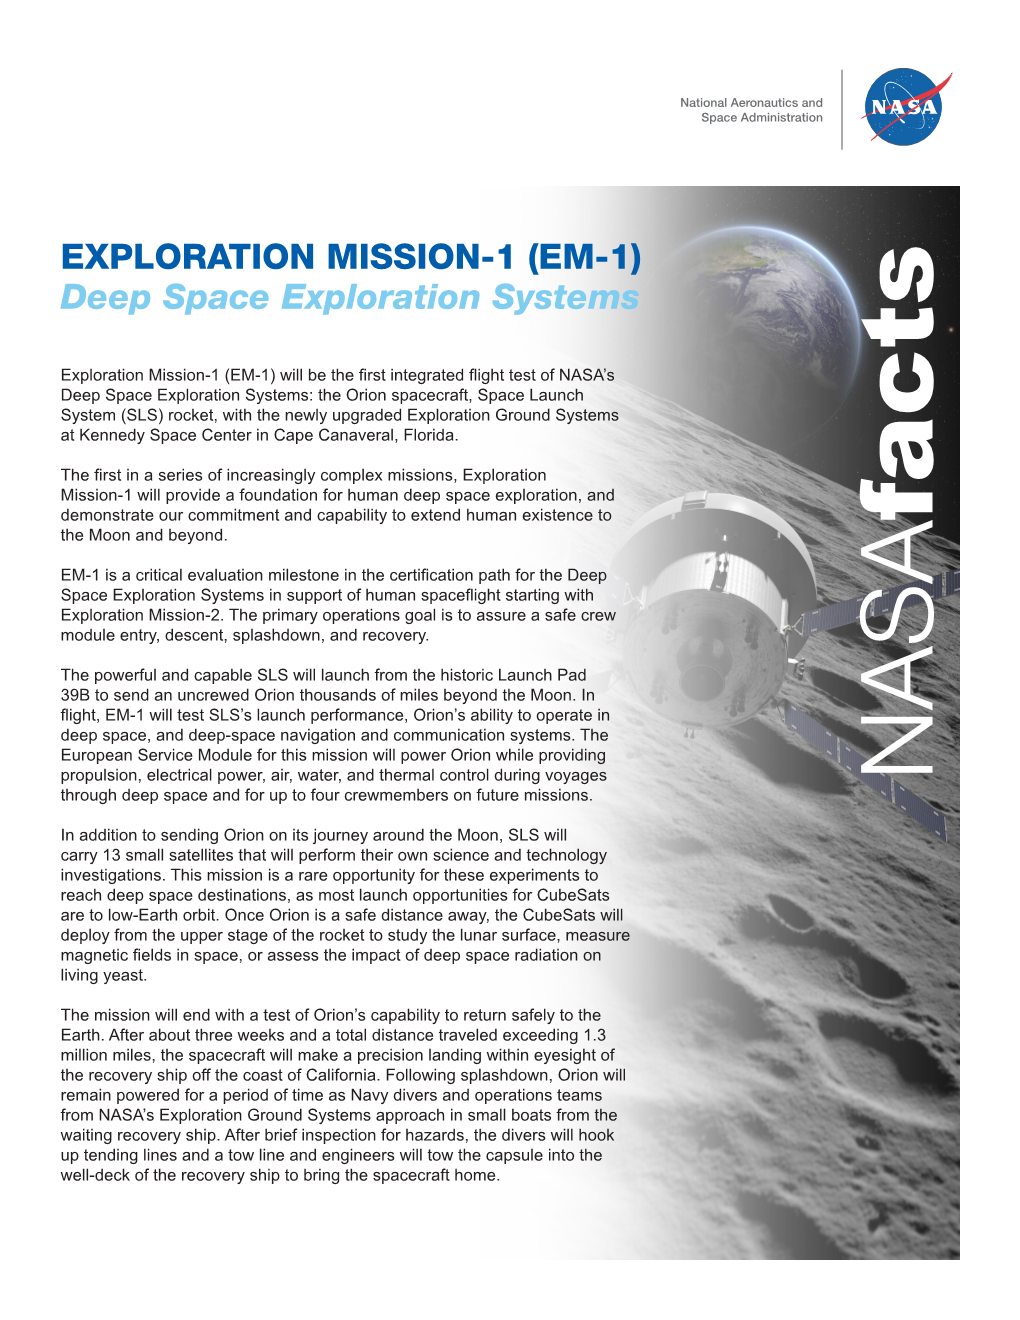 Deep Space Exploration Systems